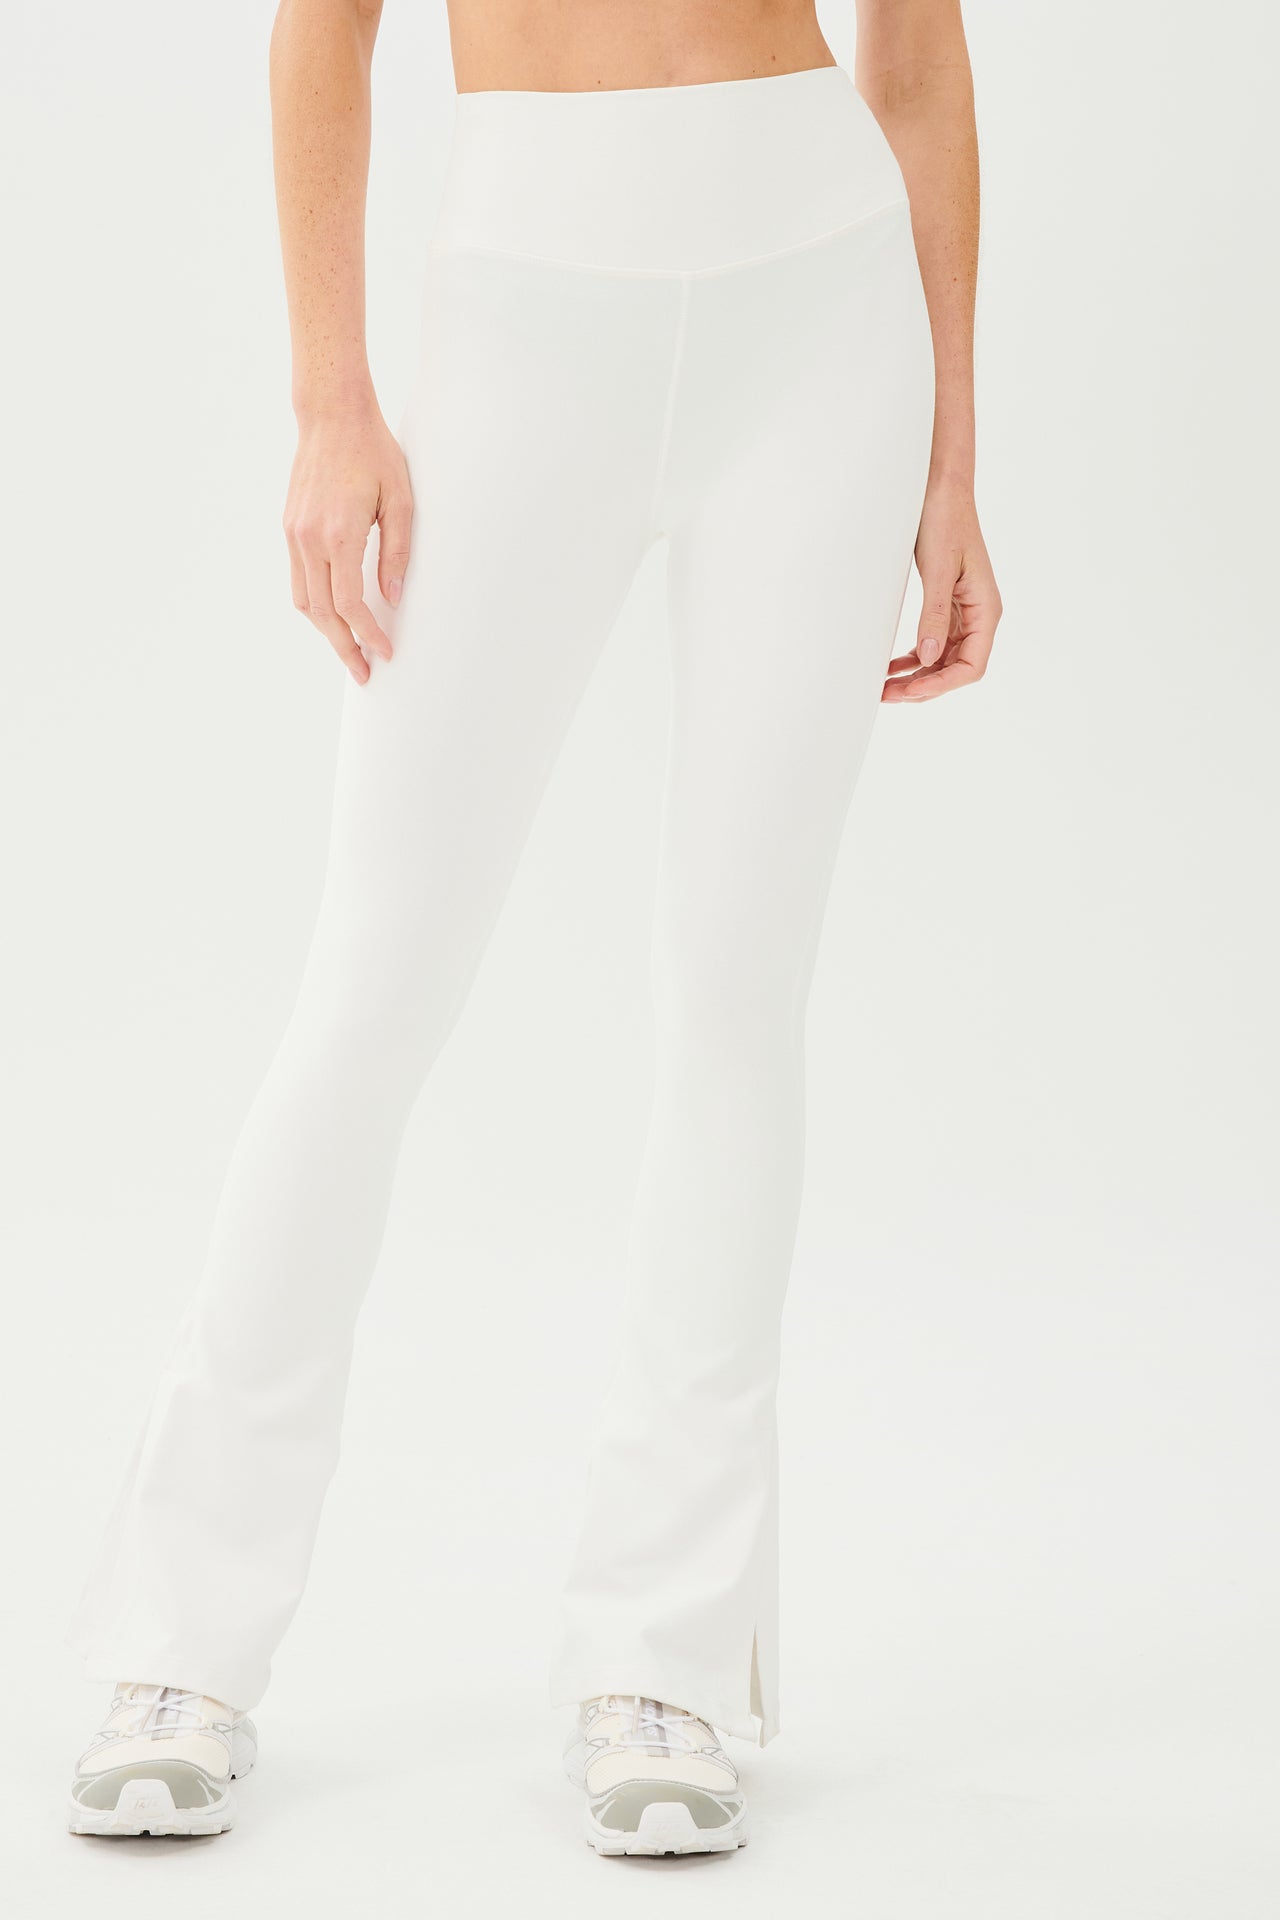 A woman wearing SPLITS59 Raquel High Waist Flare w/ Split Hem leggings in white workout fabric and a white top.